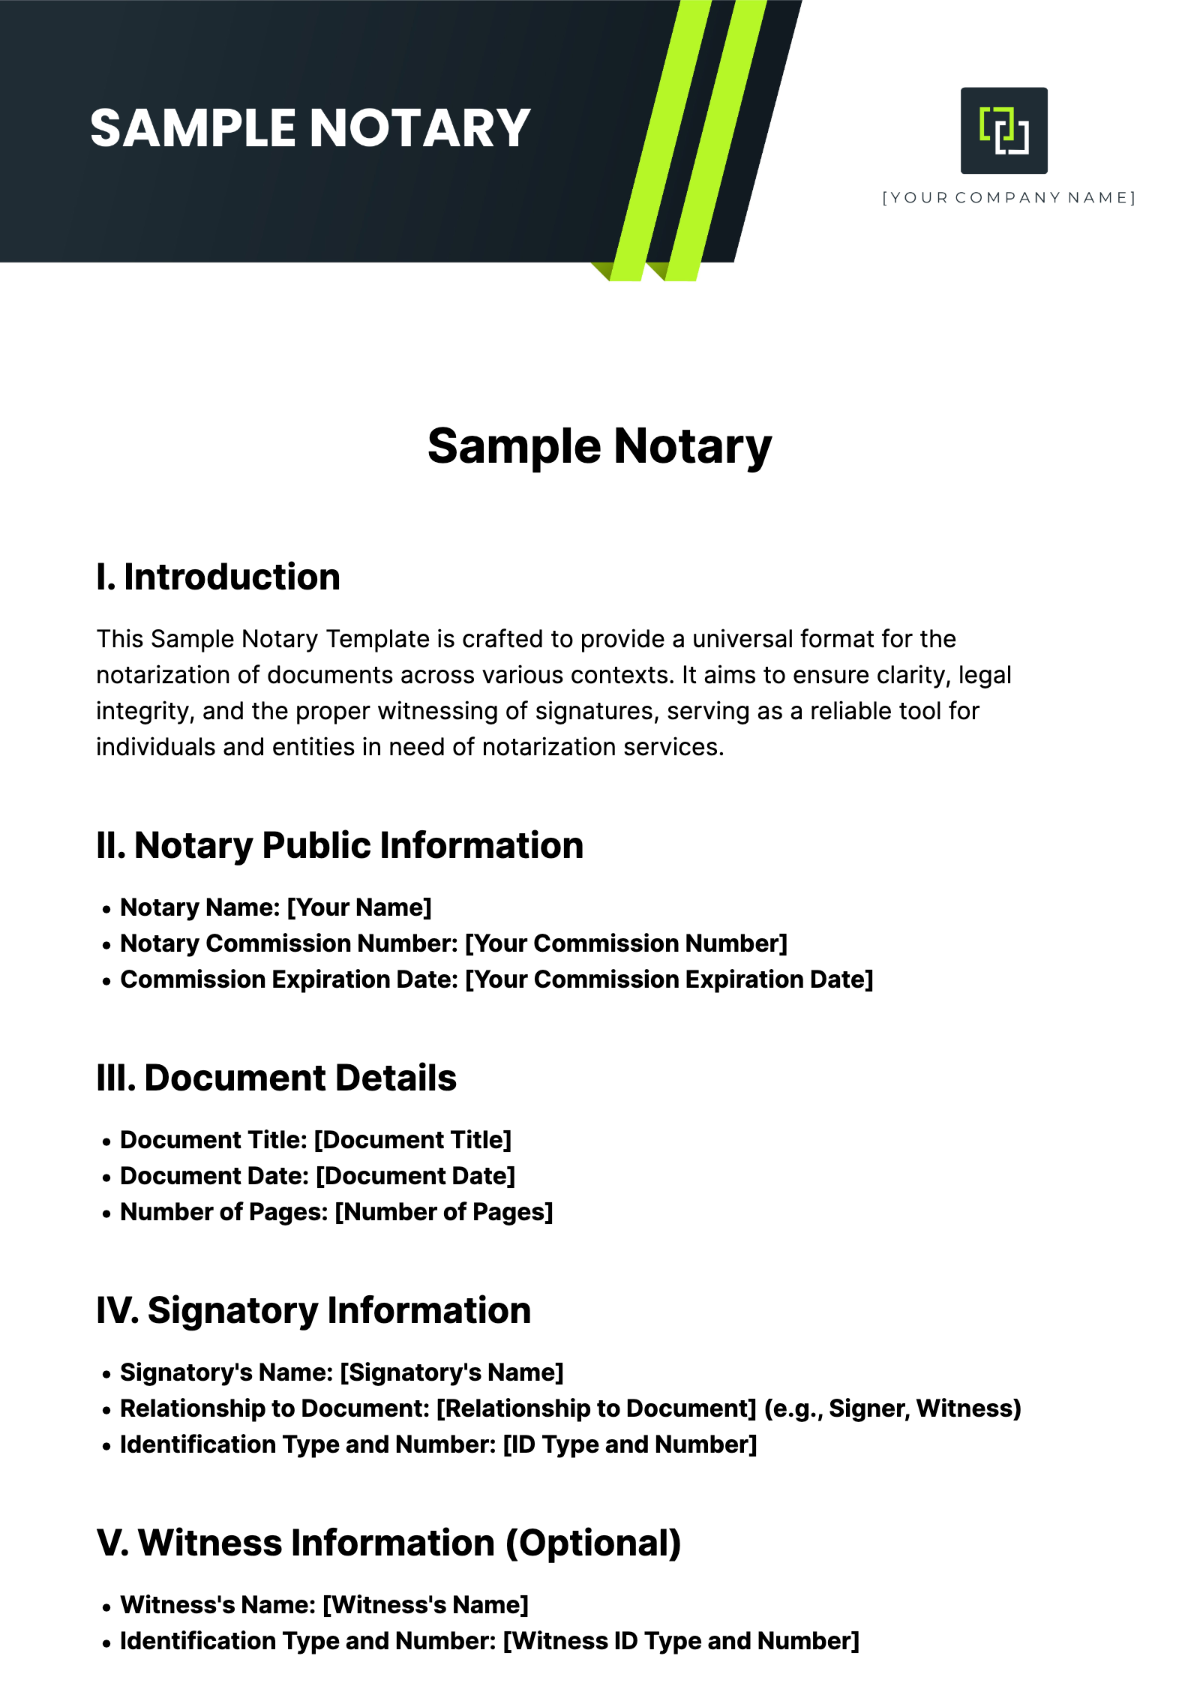 Sample Notary Template